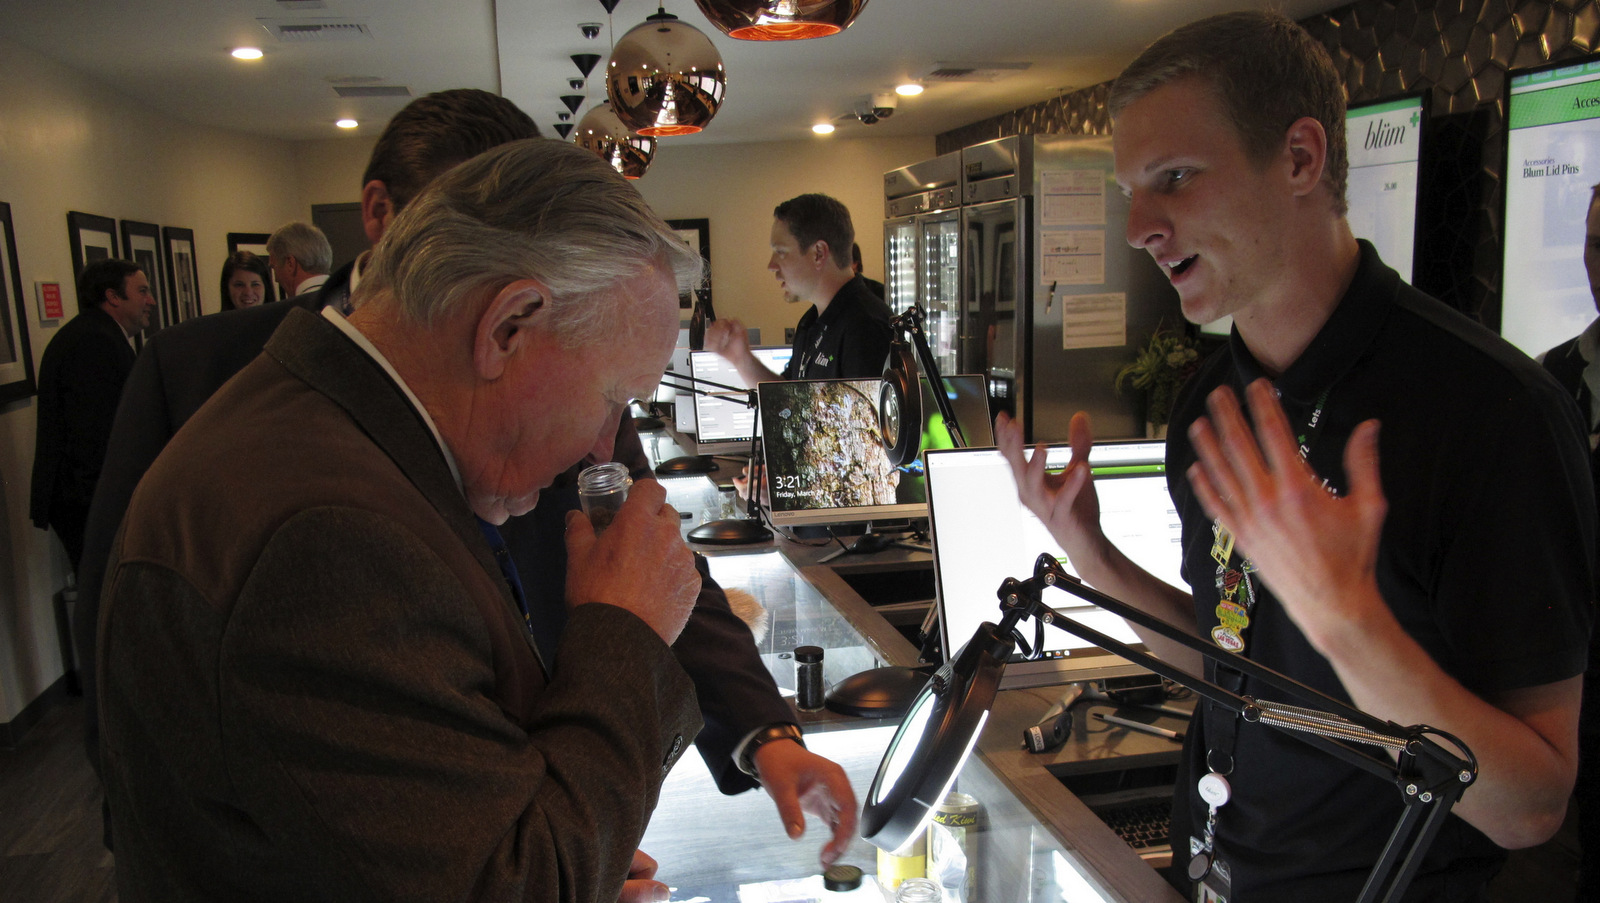 Nevada state Sen. Don Gustavson, R-Sparks, smells a sample of marijuana as Christopher Price, a ''budtender'' at the Blum medical marijuana dispensary in Reno, Nev. March 24, 2017. (AP/Scott Sonner)